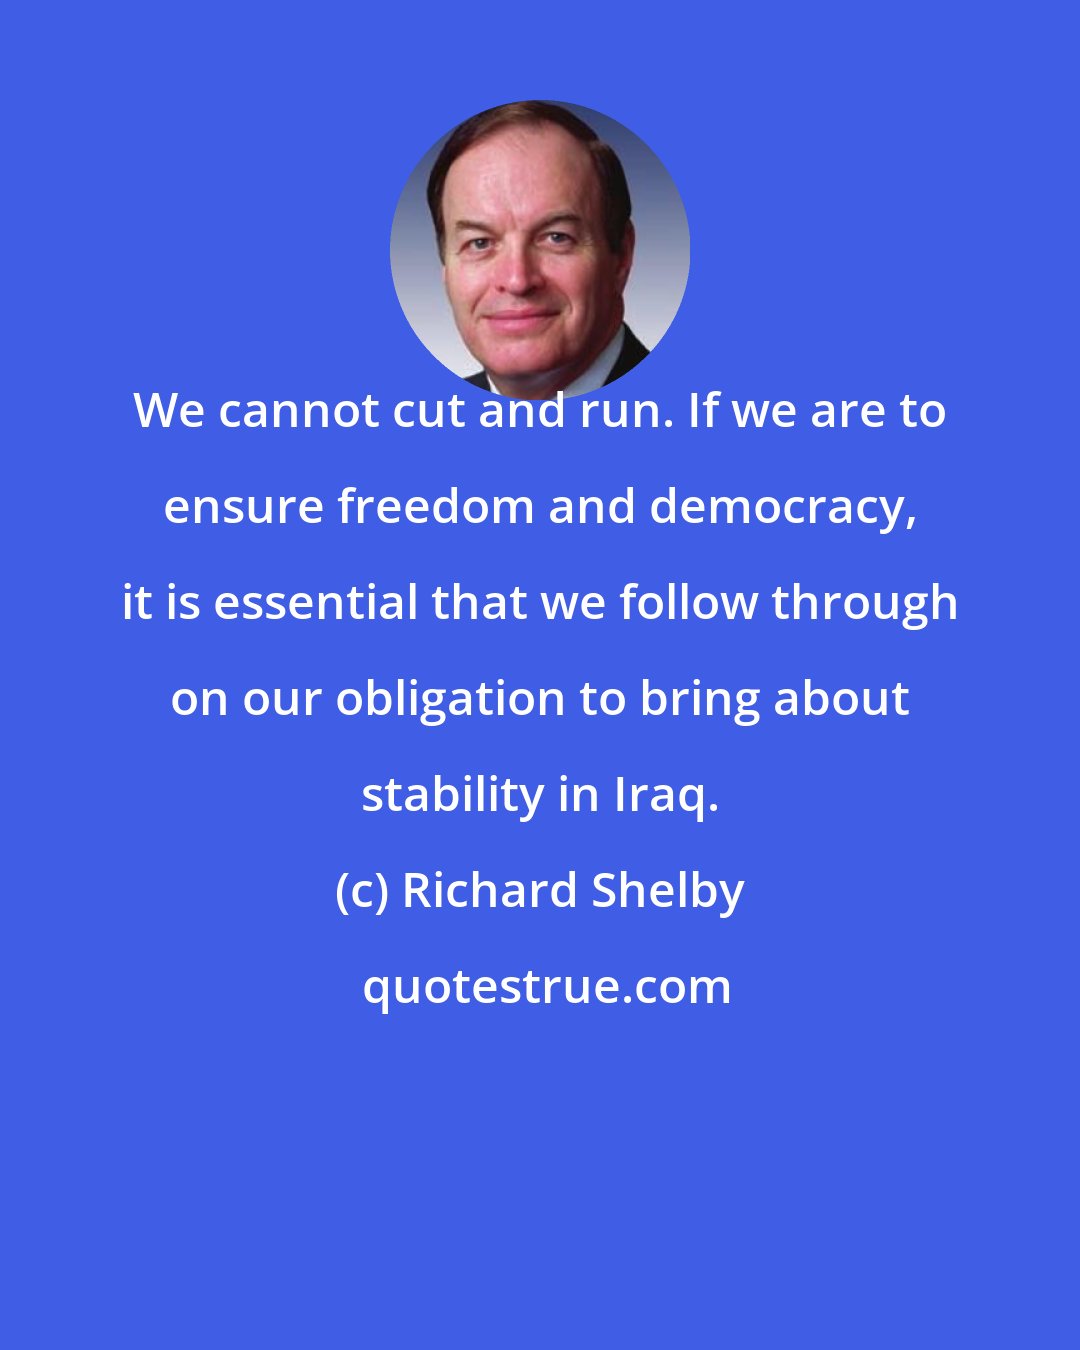 Richard Shelby: We cannot cut and run. If we are to ensure freedom and democracy, it is essential that we follow through on our obligation to bring about stability in Iraq.